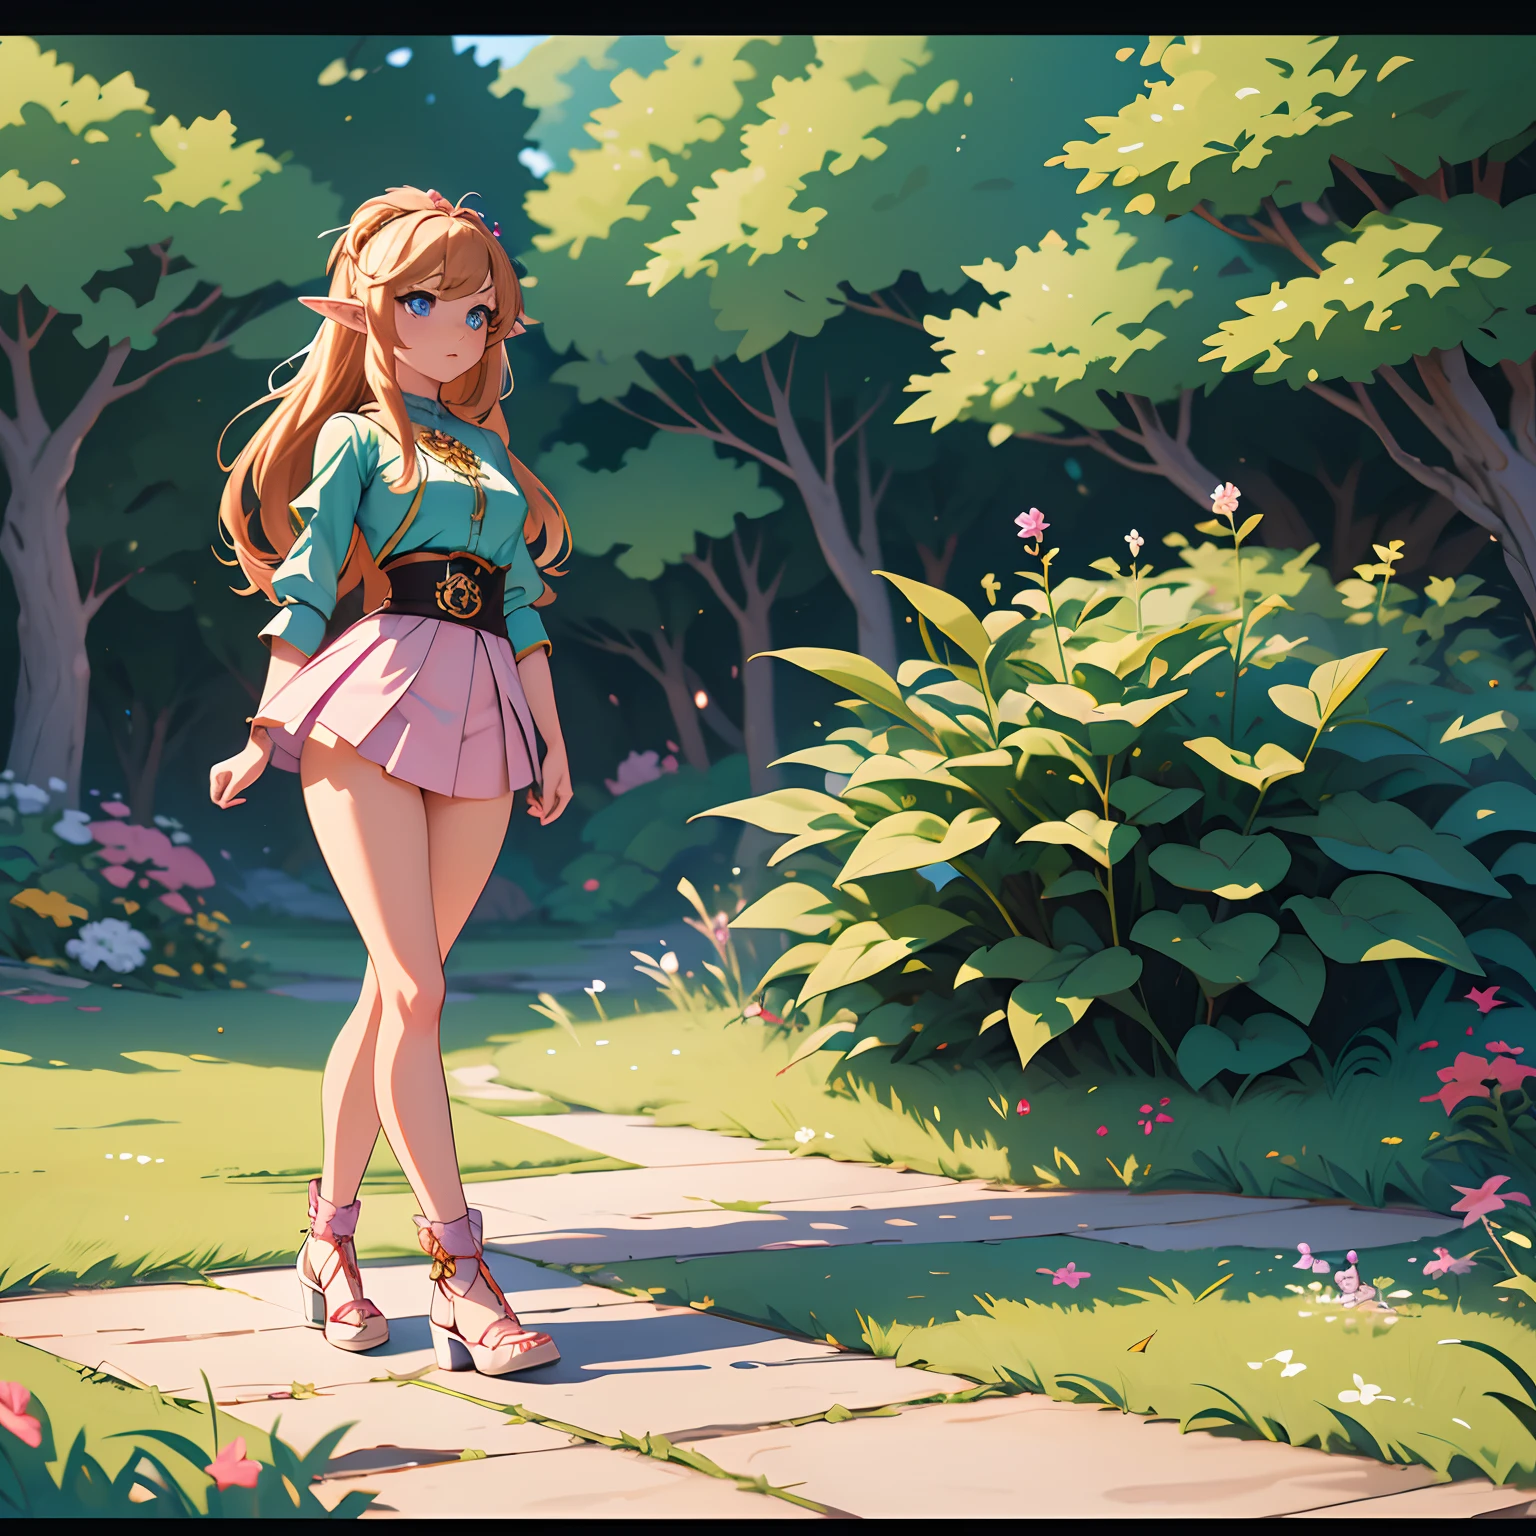 Masterpiece, full hd 8k, highly detailed, genshin impact style, fantasy style, princess, elf girl, Brown long hair, hime_cut style, blue eyes,  full-body,  elfic outfit,  green shirt, pink mini skirt, open legs, white pantys, upskirt, pantys exposed, tight highs, goldes heels shoes, standing